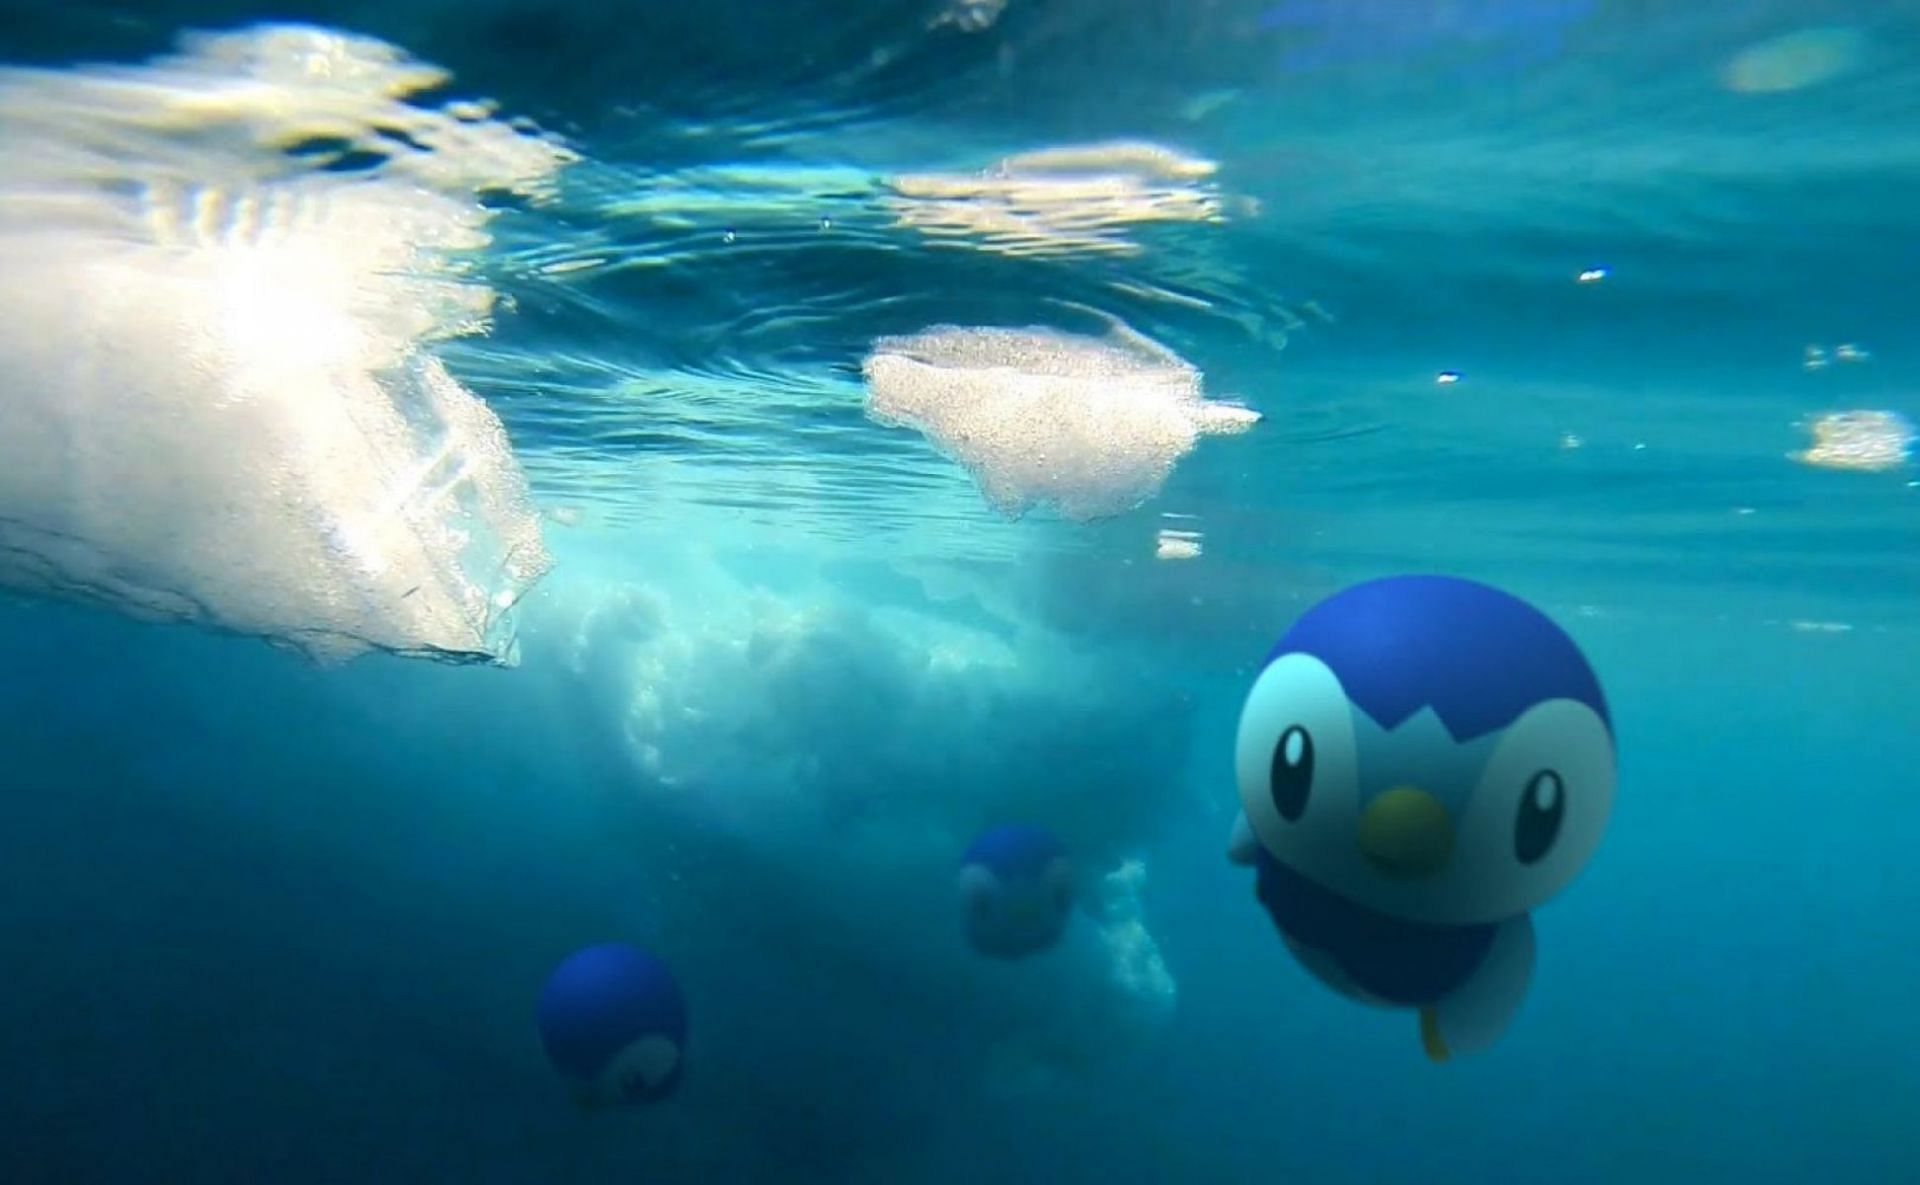 Piplup originates as a starter Pokemon from Generation IV of the main Pokemon games (Image via Niantic)